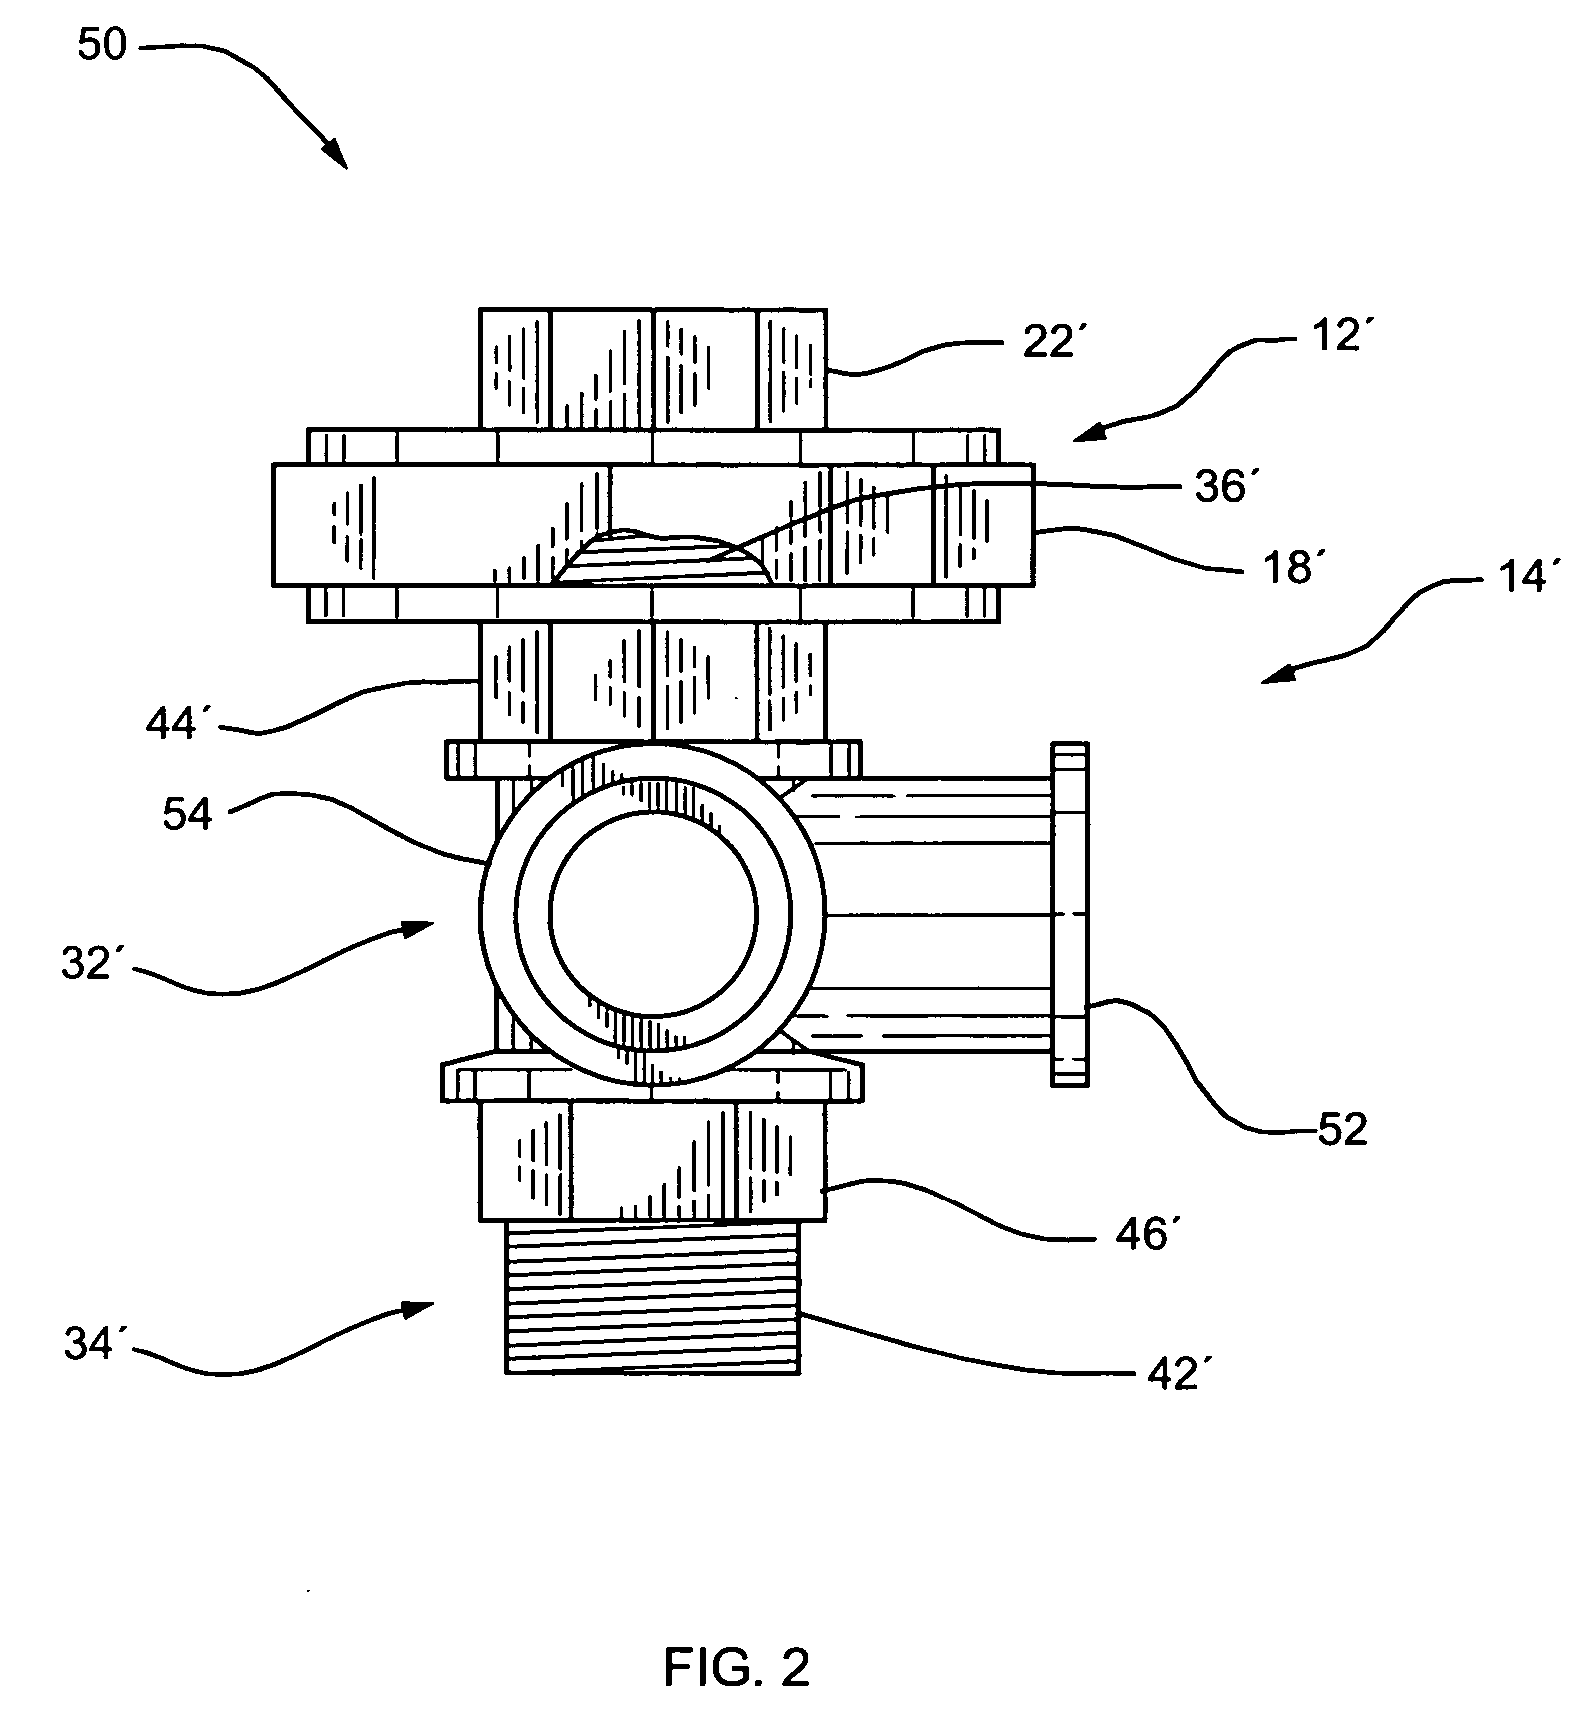 Quick connect and quick disconnect plumbing apparatus